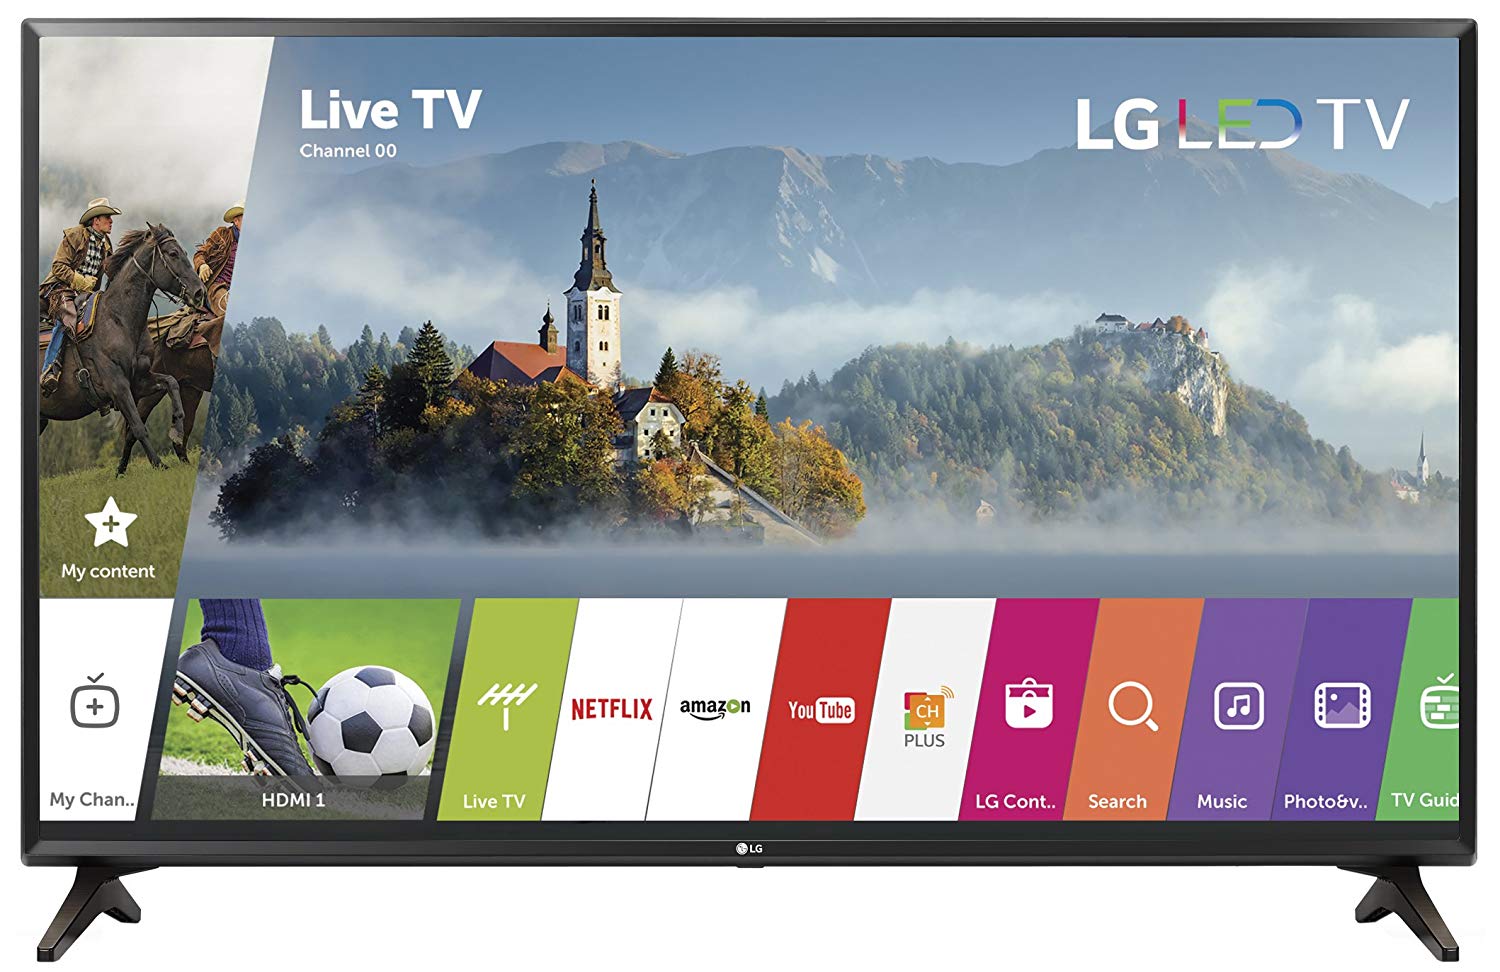  smart tv functions, what is a smart tv, smart tv, what's a smart tv, smart tv, what is a smart tv, smart tvs, black friday 4k tv deals, how do i know if i have a smart tv, what can a smart tv do, how do you know if you have a smart tv, is my tv a smart tv, how to tell if you have a smart tv, what can you do witch smart tv, what does smart tv mean, do i have smart tv, how to tell if your tv is a smart tv, when did smart tvs come out, what is a smart tv capable of, how can you tell if you have a smart tv, how smart tv works, how does a smart tv work, what makes a tv a smart tv, what does a smart tv do, smart tv capabilities, what is a smart tv do, smart tv capabilities, what is a smart tv do, smart tv definition, smart tv means, define smart tv